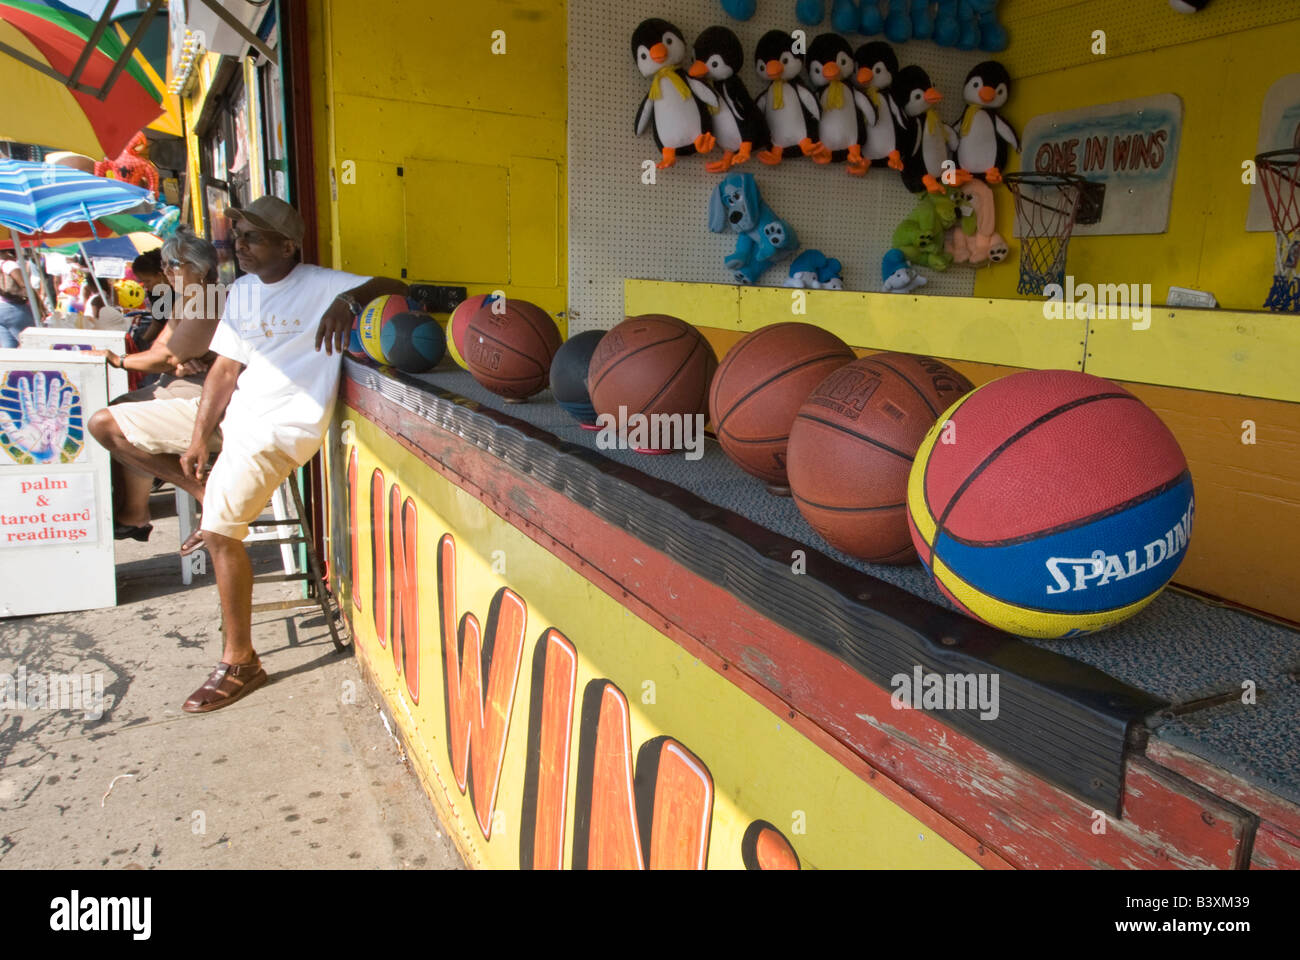 Vendor waiting for customers at a hoop game at the Coney Island amusement park Stock Photo